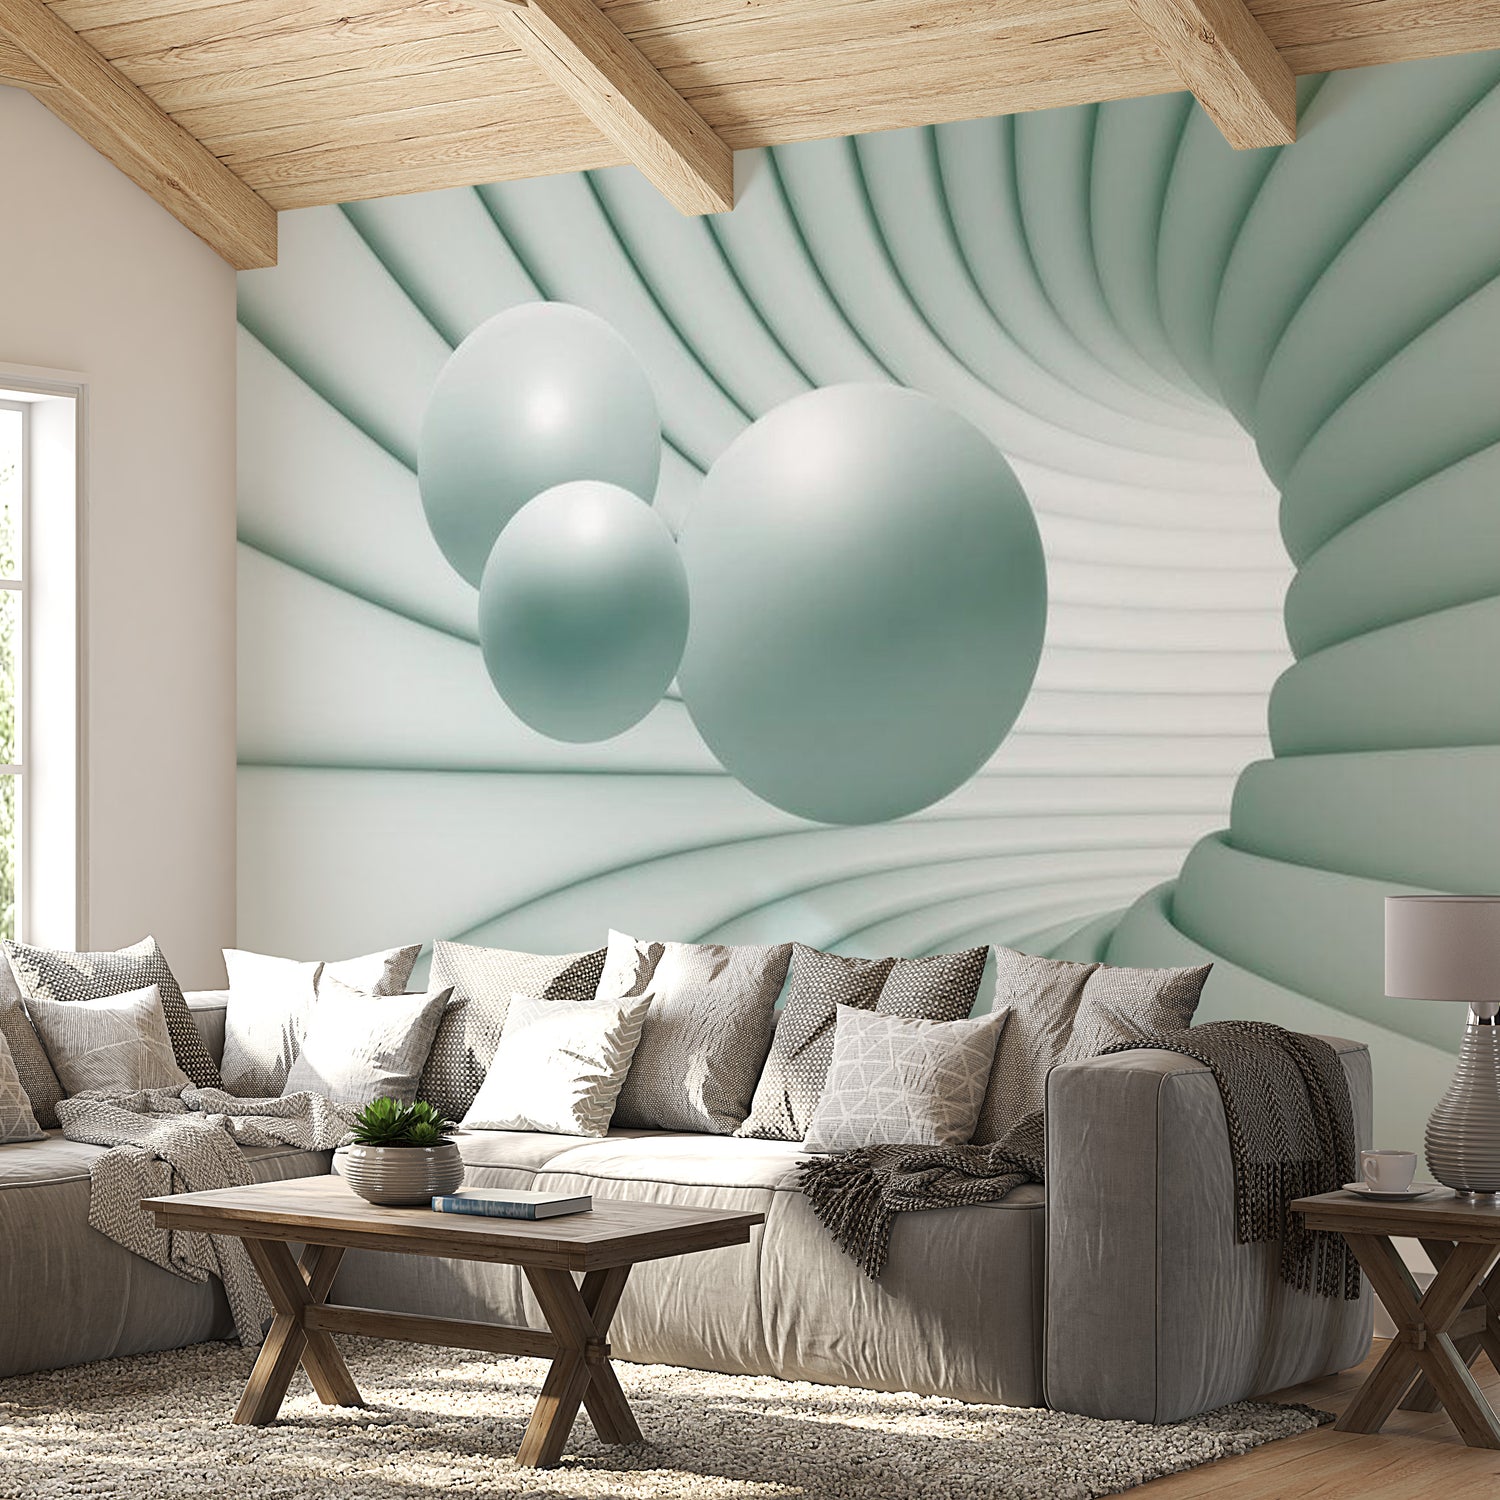 Peel & Stick 3D Illusion Wall Mural - In The Green Tunnel - Removable Wall Decals